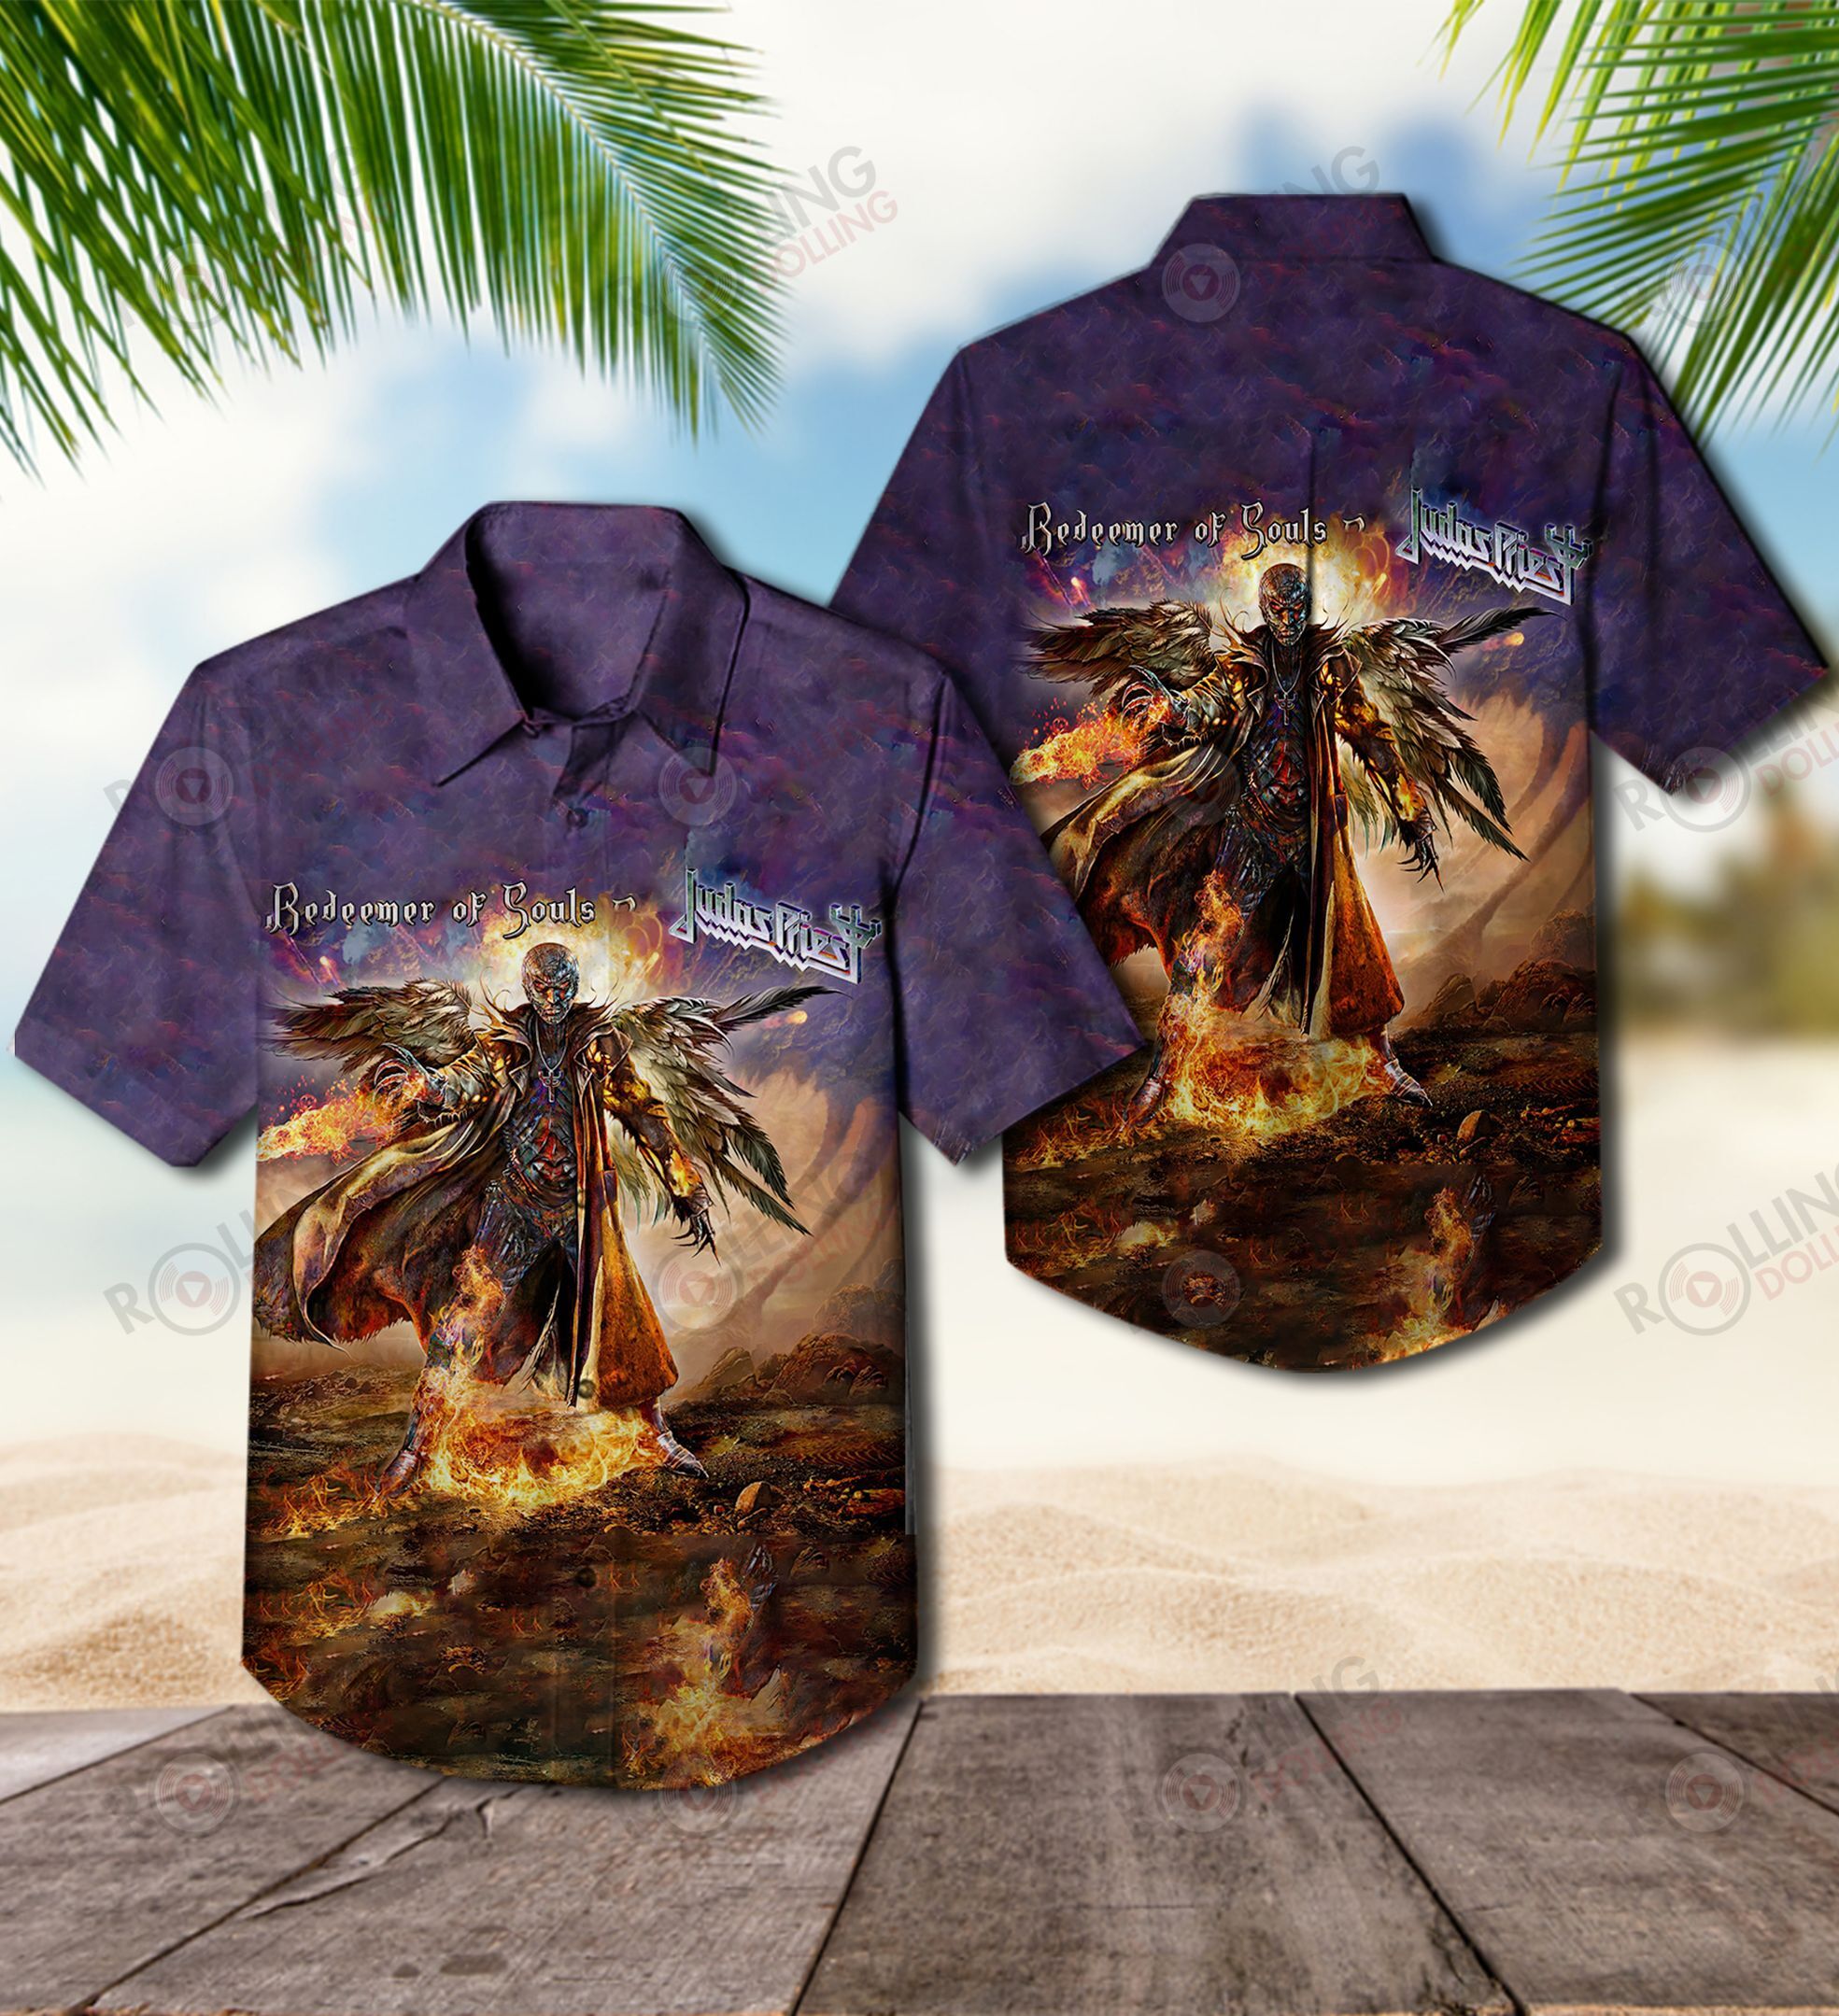 For summer, consider wearing This Amazing Hawaiian Shirt shirt in our store 85